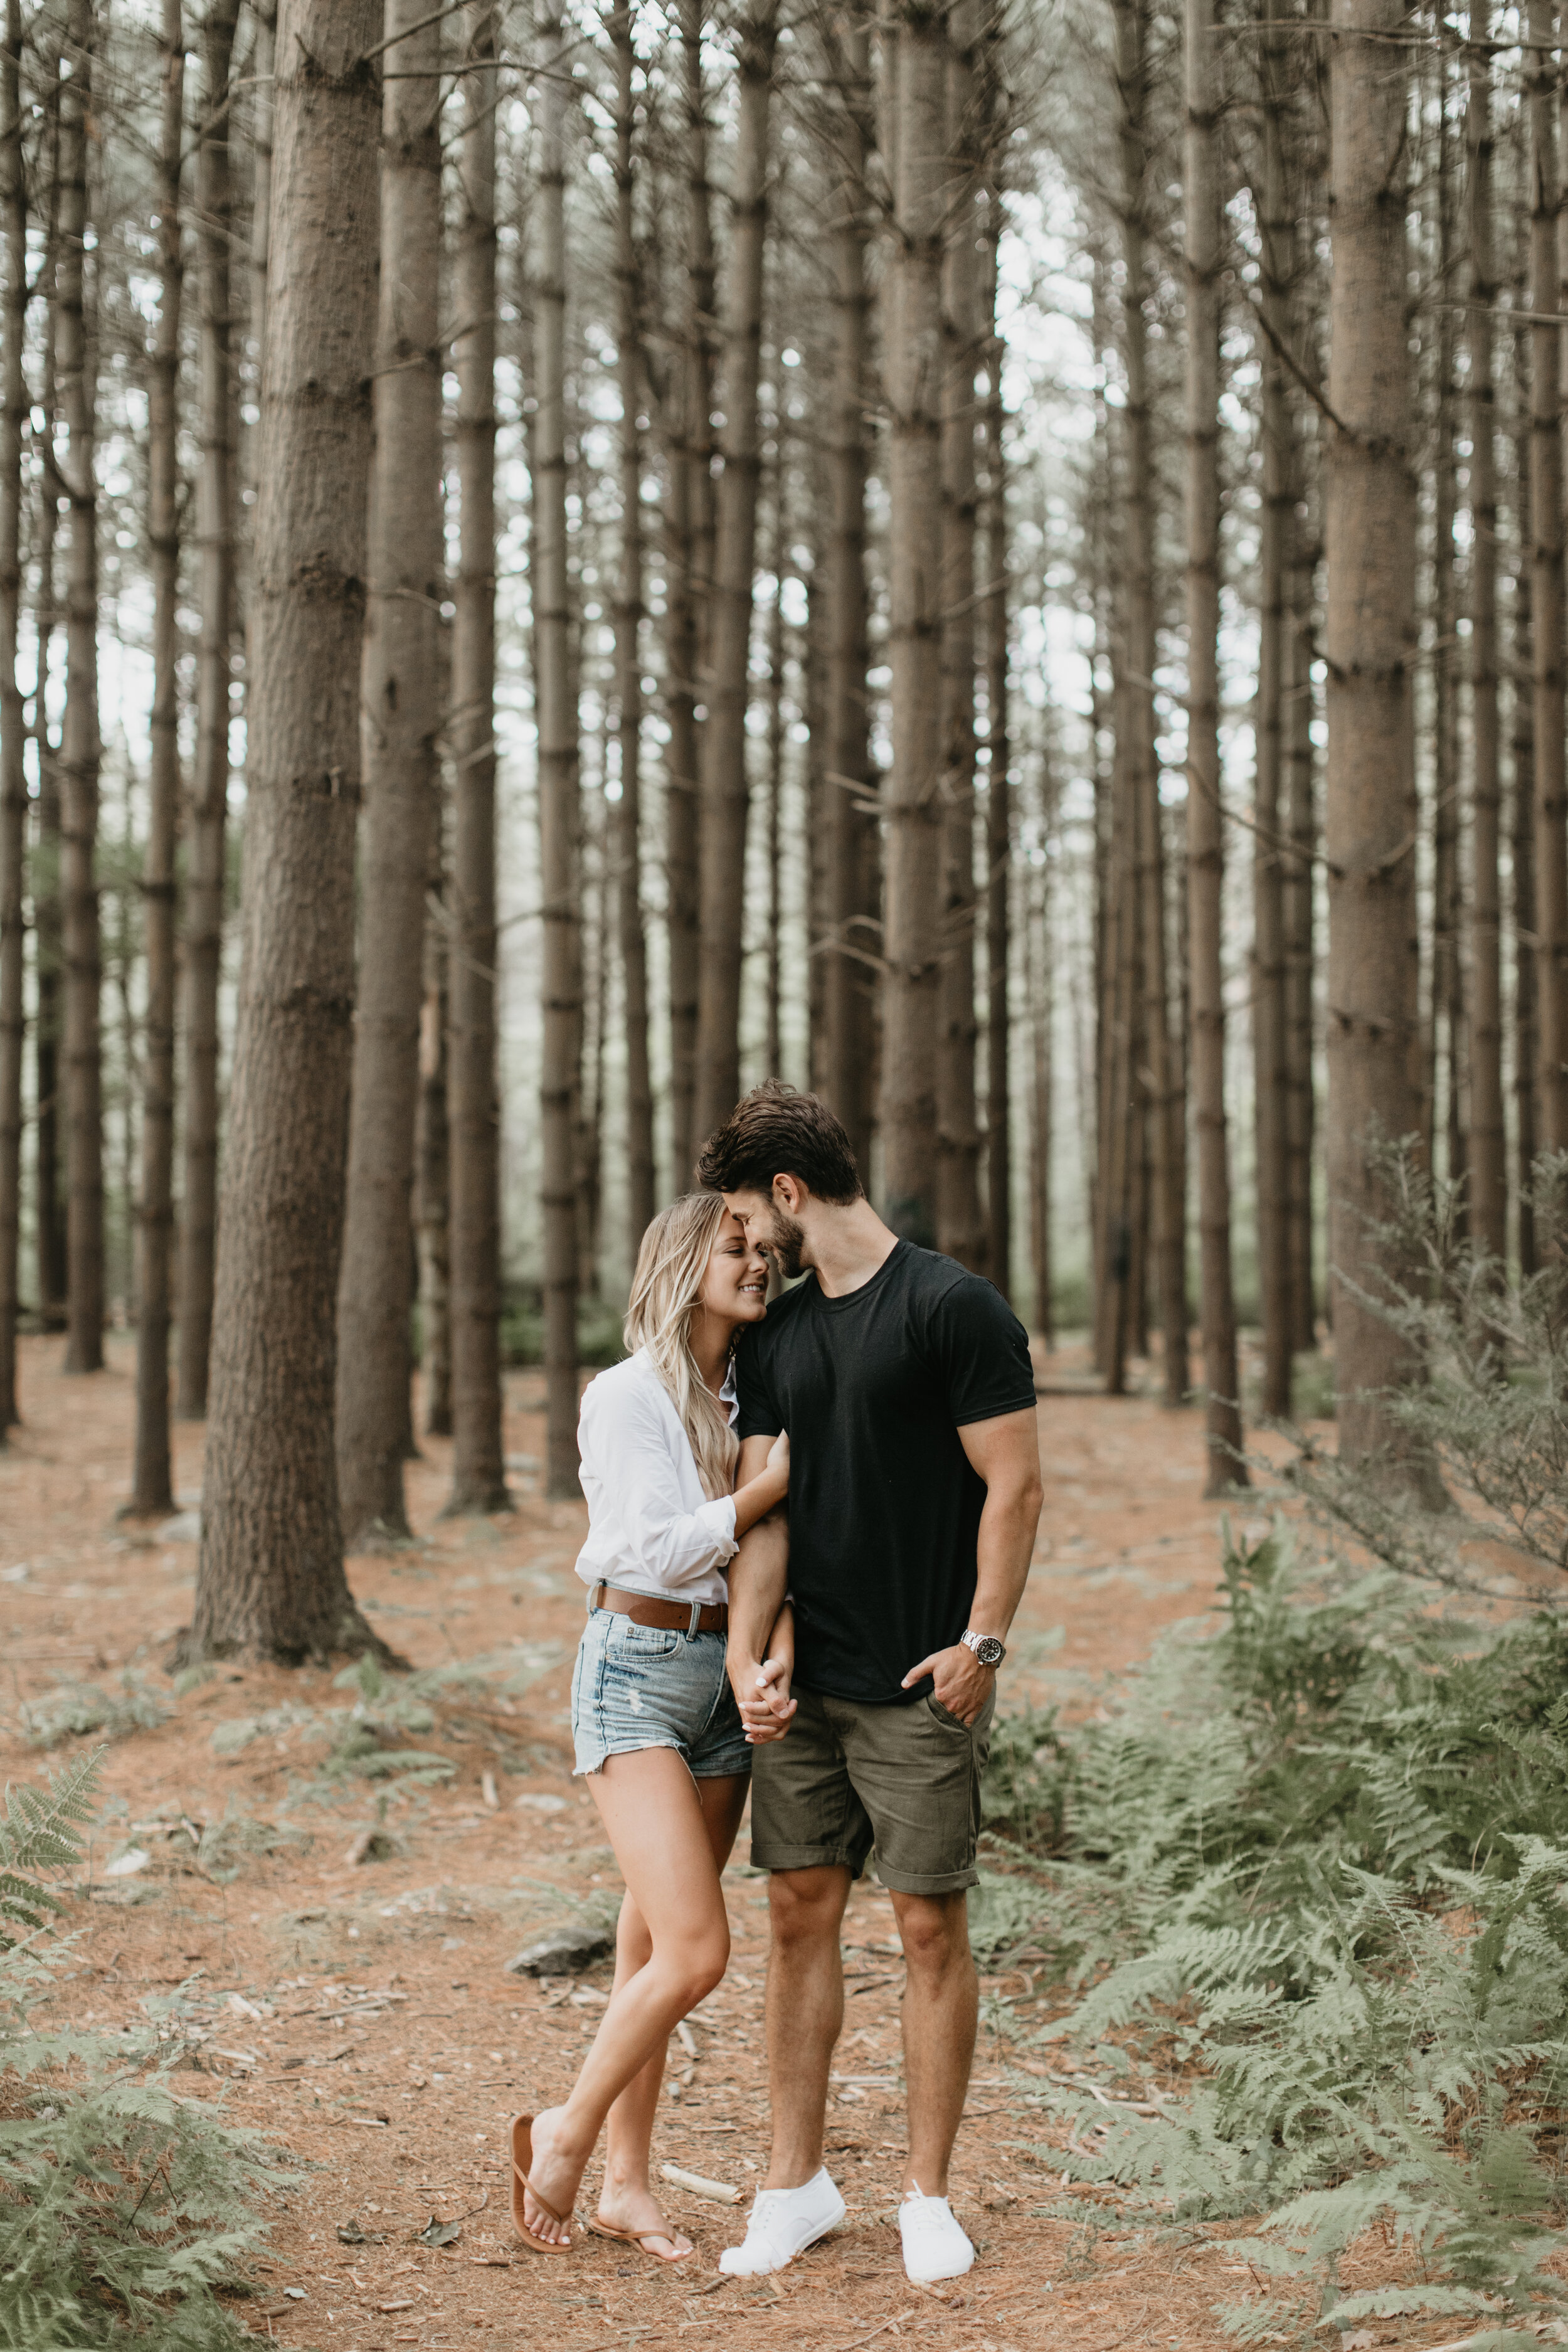 Nicole-Daacke-Photography-michaux-state-forest-elopement-adventure-engagement-session-pennsylvania-elopement-pa-elopement-photographer-gettysburg-photographer-state-park-elopement-engagement-session-pennsylvania-waterfall-118.jpg